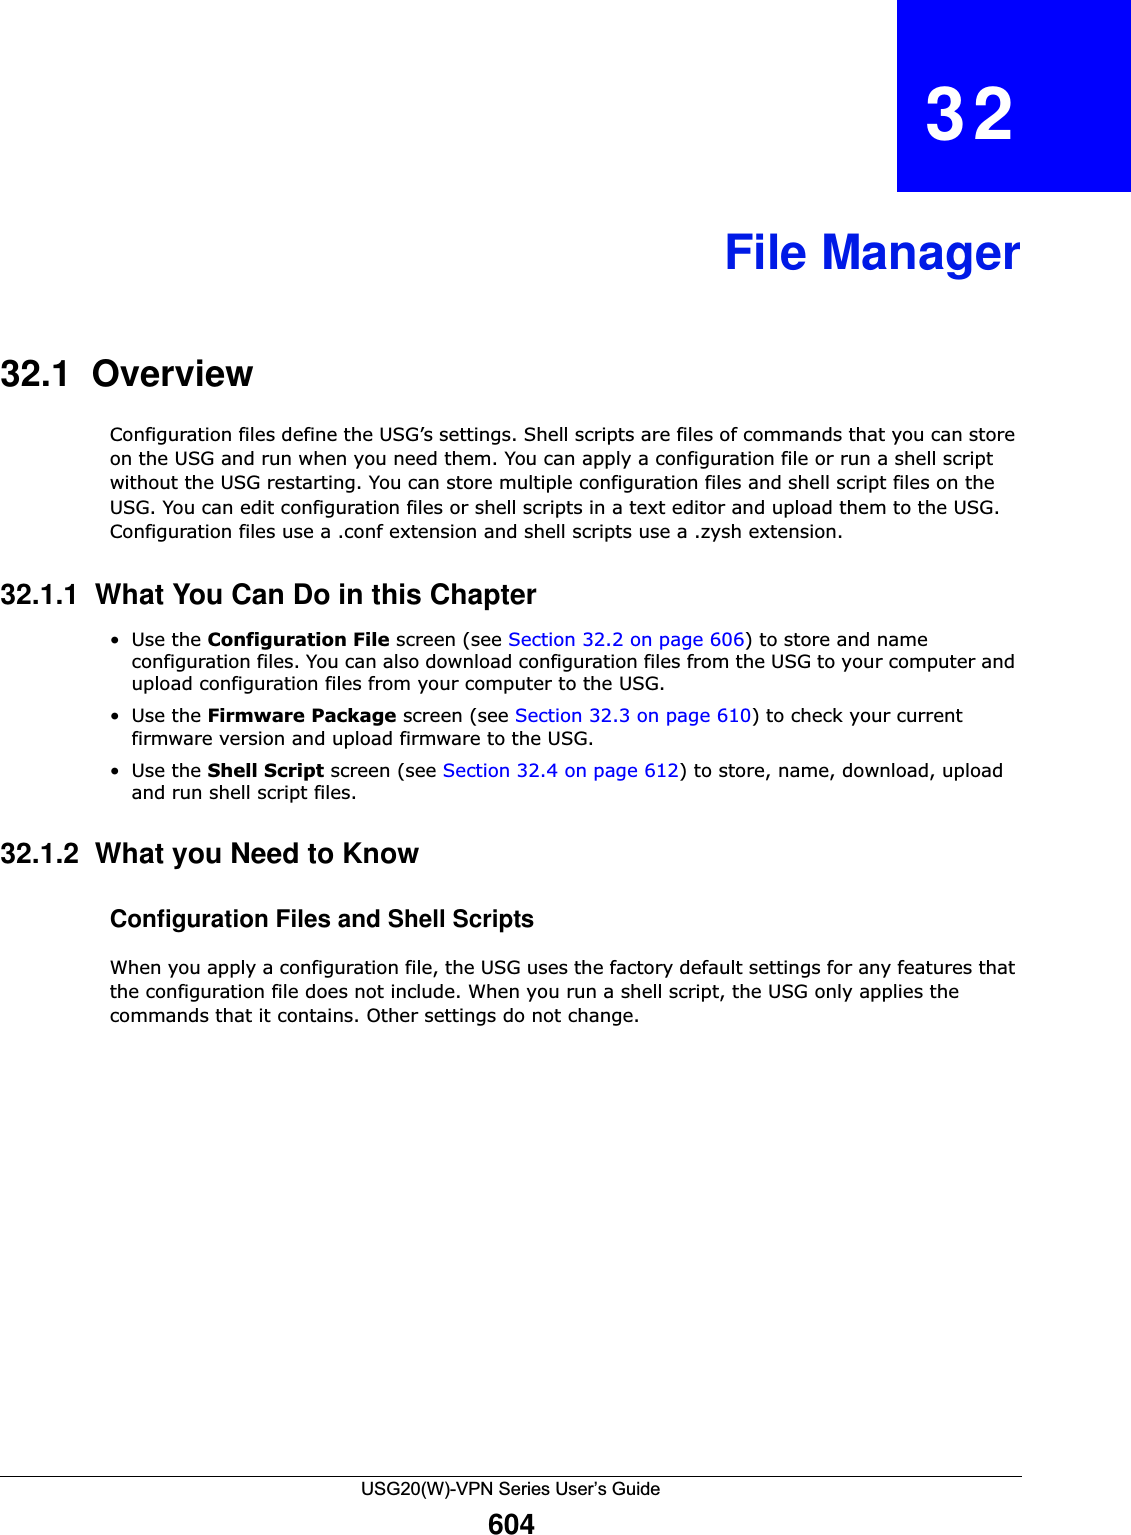 USG20(W)-VPN Series User’s Guide604CHAPTER   32File Manager32.1  OverviewConfiguration files define the USG’s settings. Shell scripts are files of commands that you can store on the USG and run when you need them. You can apply a configuration file or run a shell script without the USG restarting. You can store multiple configuration files and shell script files on the USG. You can edit configuration files or shell scripts in a text editor and upload them to the USG. Configuration files use a .conf extension and shell scripts use a .zysh extension.32.1.1  What You Can Do in this Chapter•Use the Configuration File screen (see Section 32.2 on page 606) to store and name configuration files. You can also download configuration files from the USG to your computer and upload configuration files from your computer to the USG.•Use the Firmware Package screen (see Section 32.3 on page 610) to check your current firmware version and upload firmware to the USG.•Use the Shell Script screen (see Section 32.4 on page 612) to store, name, download, upload and run shell script files. 32.1.2  What you Need to Know Configuration Files and Shell ScriptsWhen you apply a configuration file, the USG uses the factory default settings for any features that the configuration file does not include. When you run a shell script, the USG only applies the commands that it contains. Other settings do not change.